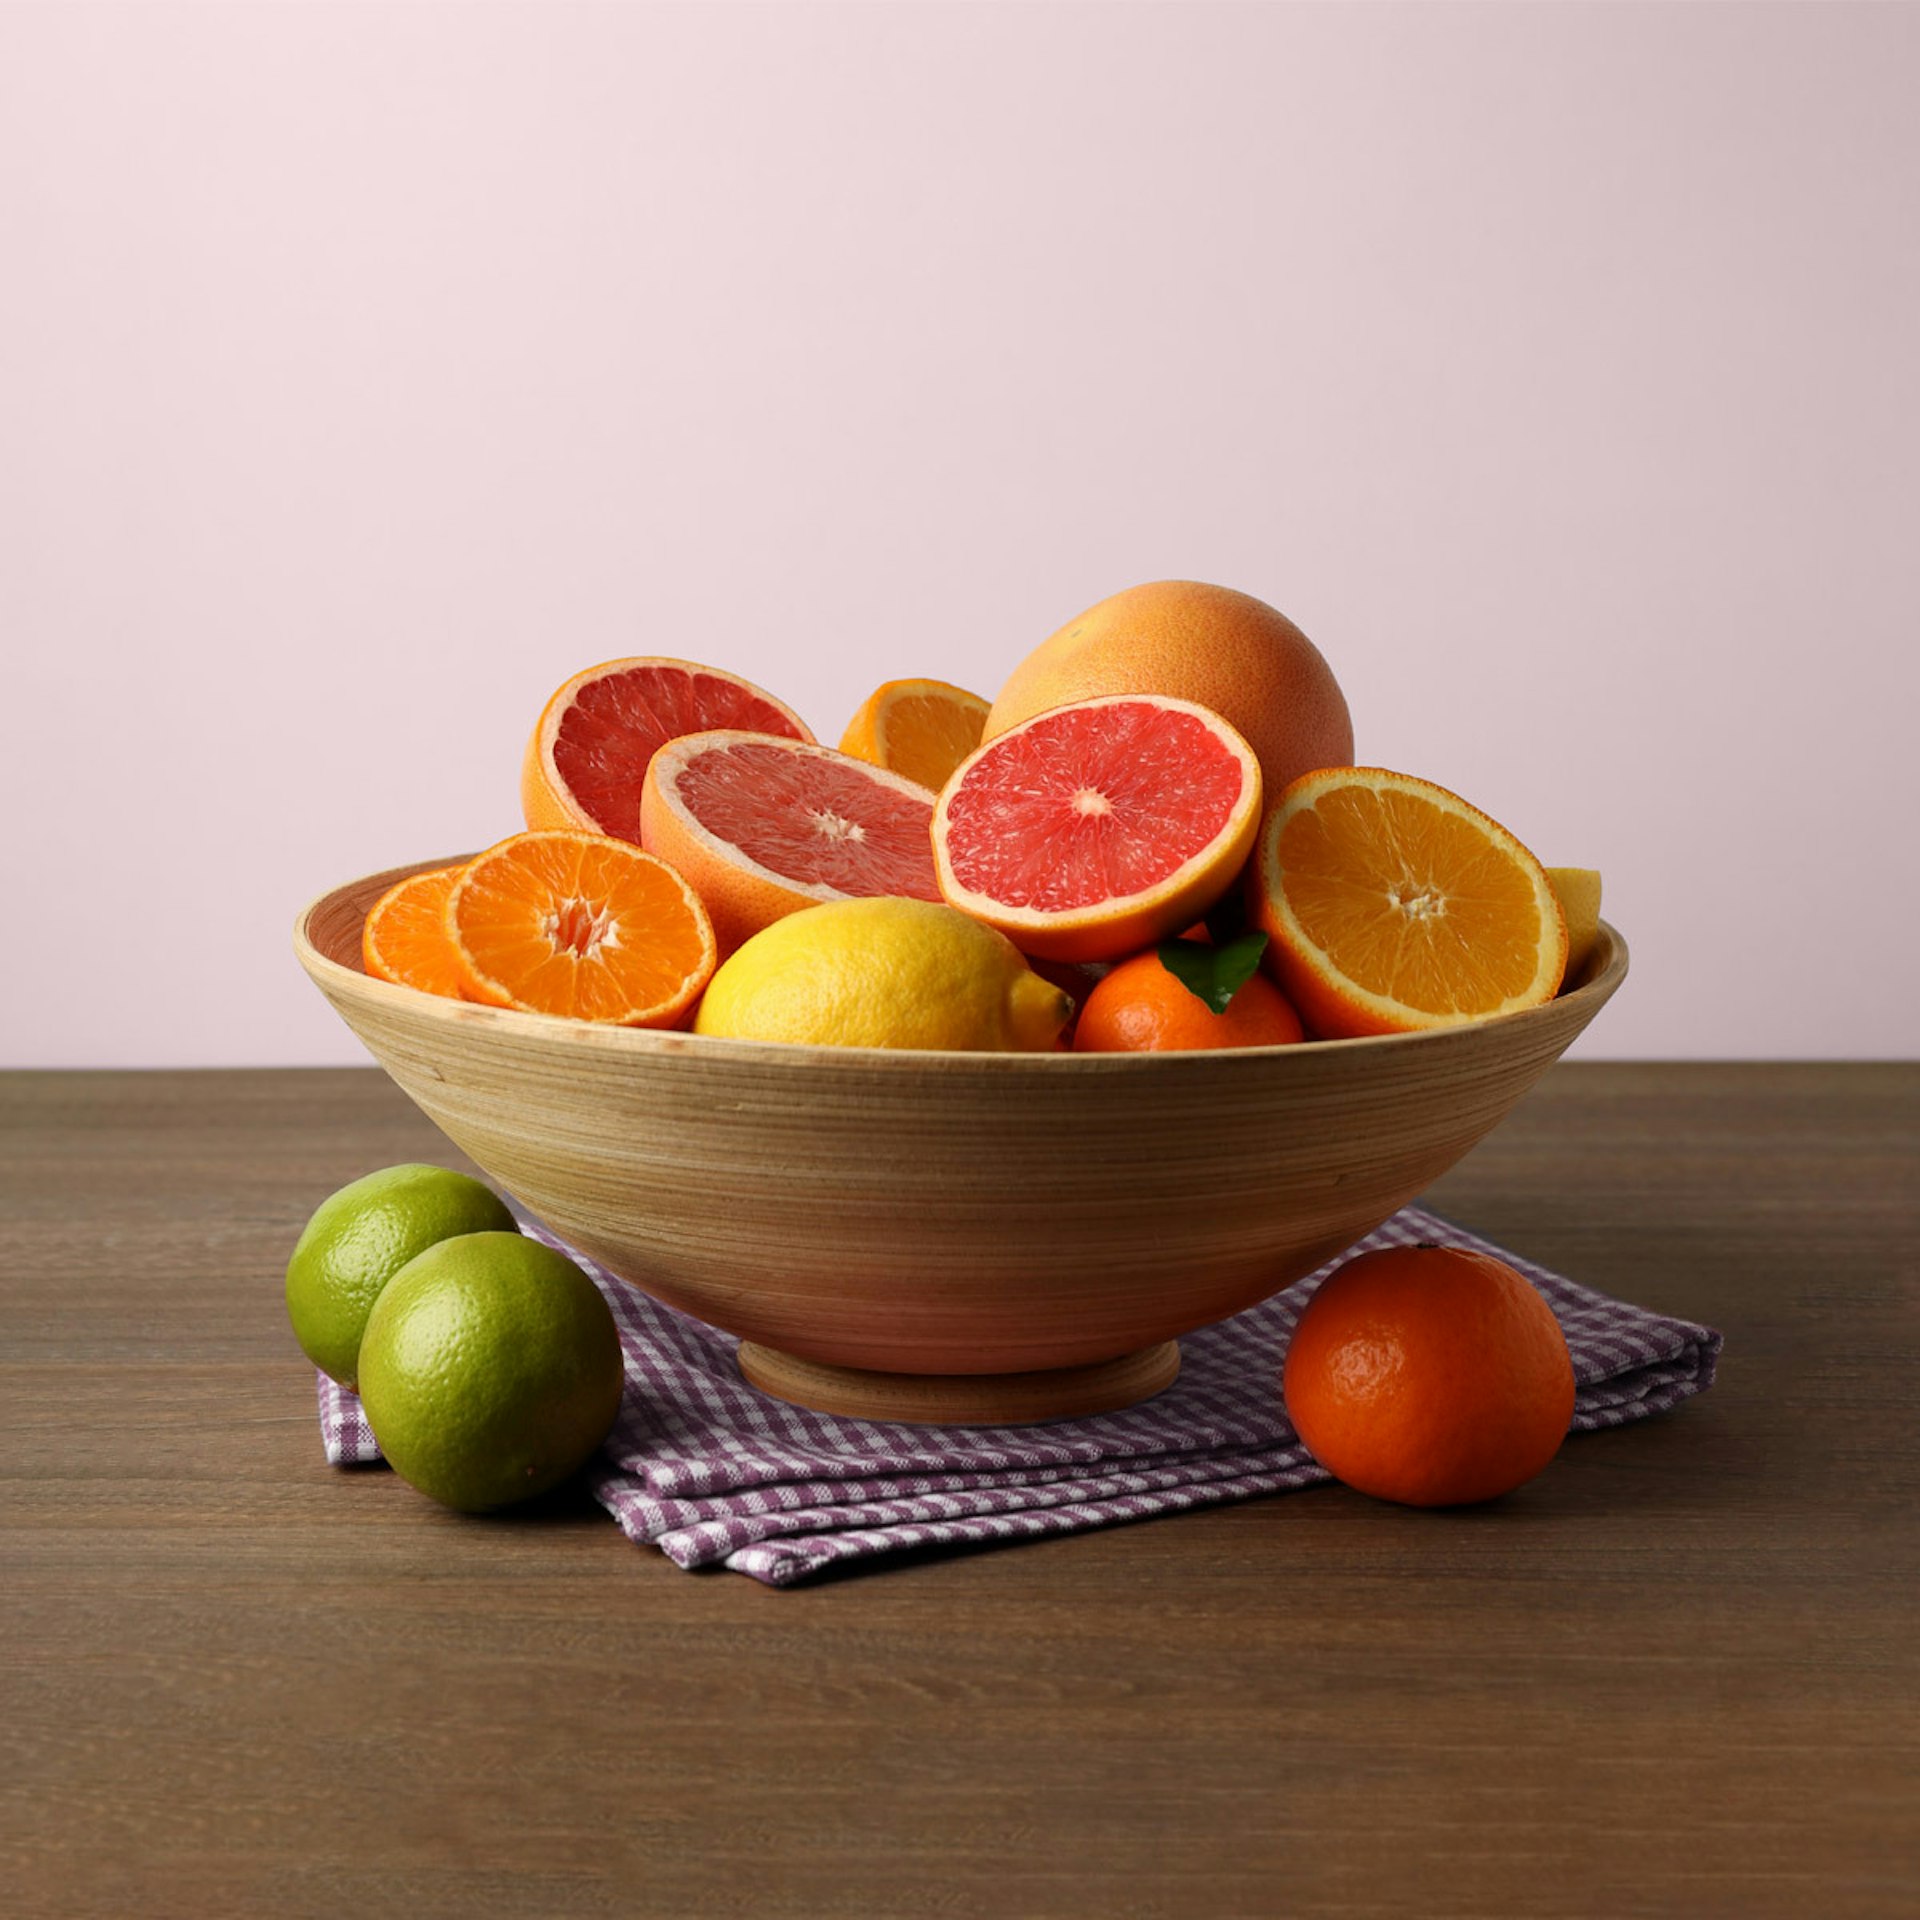 A wooden bowl of assorted citrus fruits is sitting on a tablecloth on top of a wooden table, in front of a light pink background.